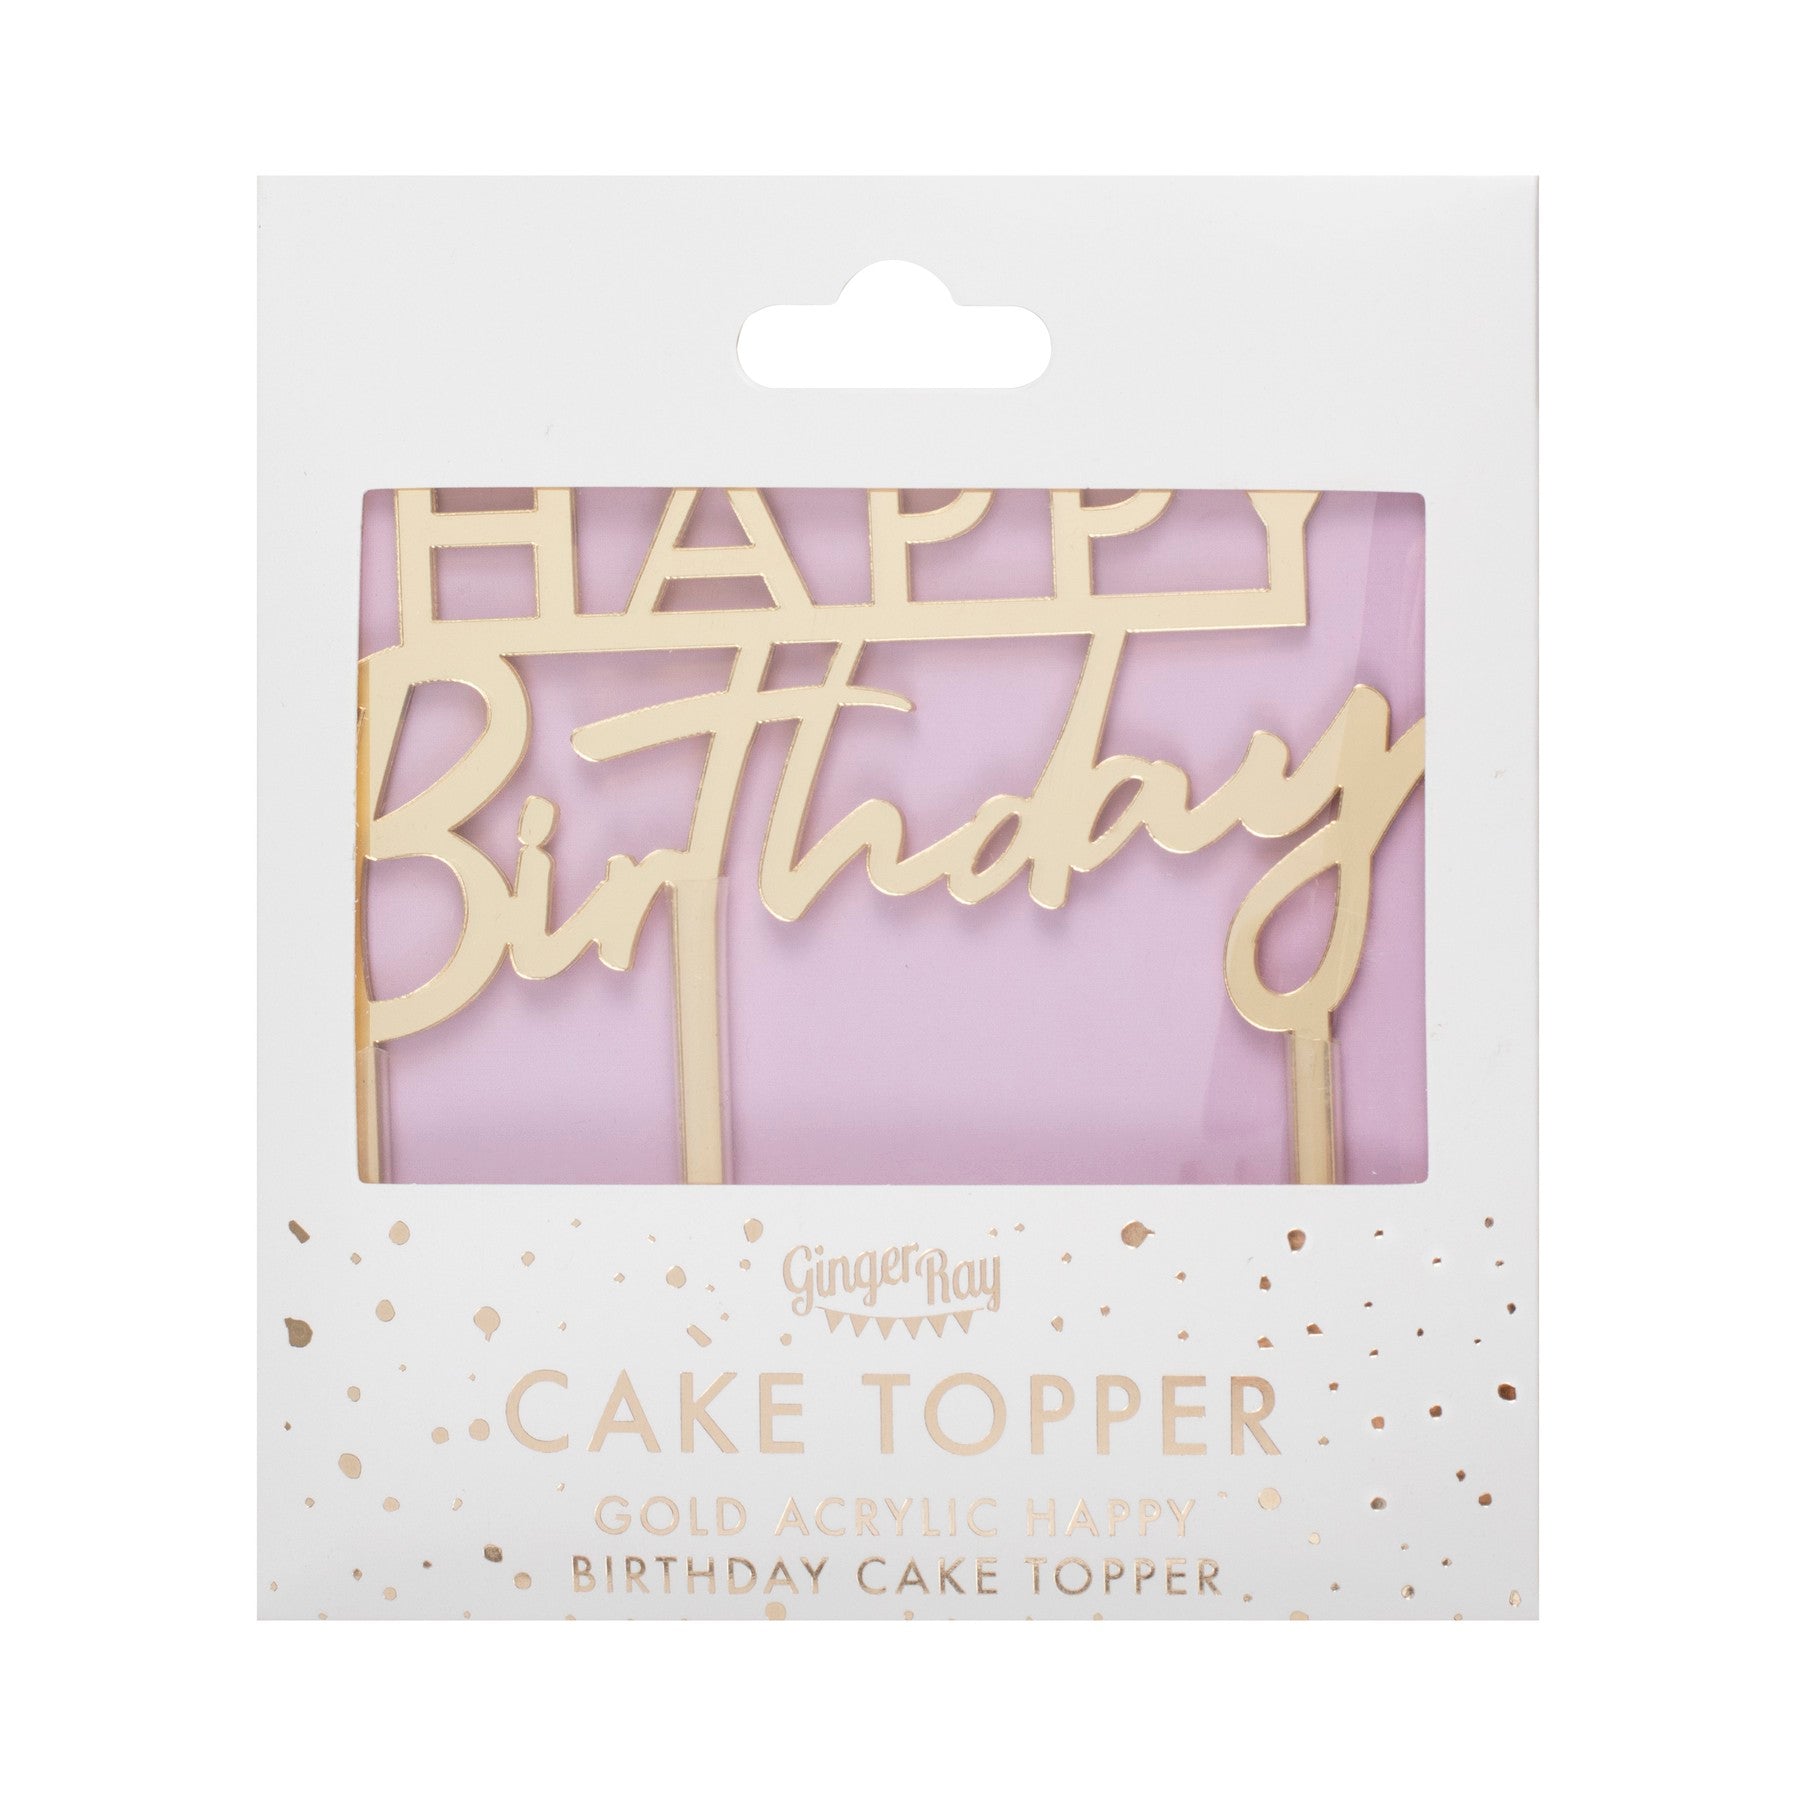 Gold Acrylic Happy Birthday Cake Topper Ginger Ray